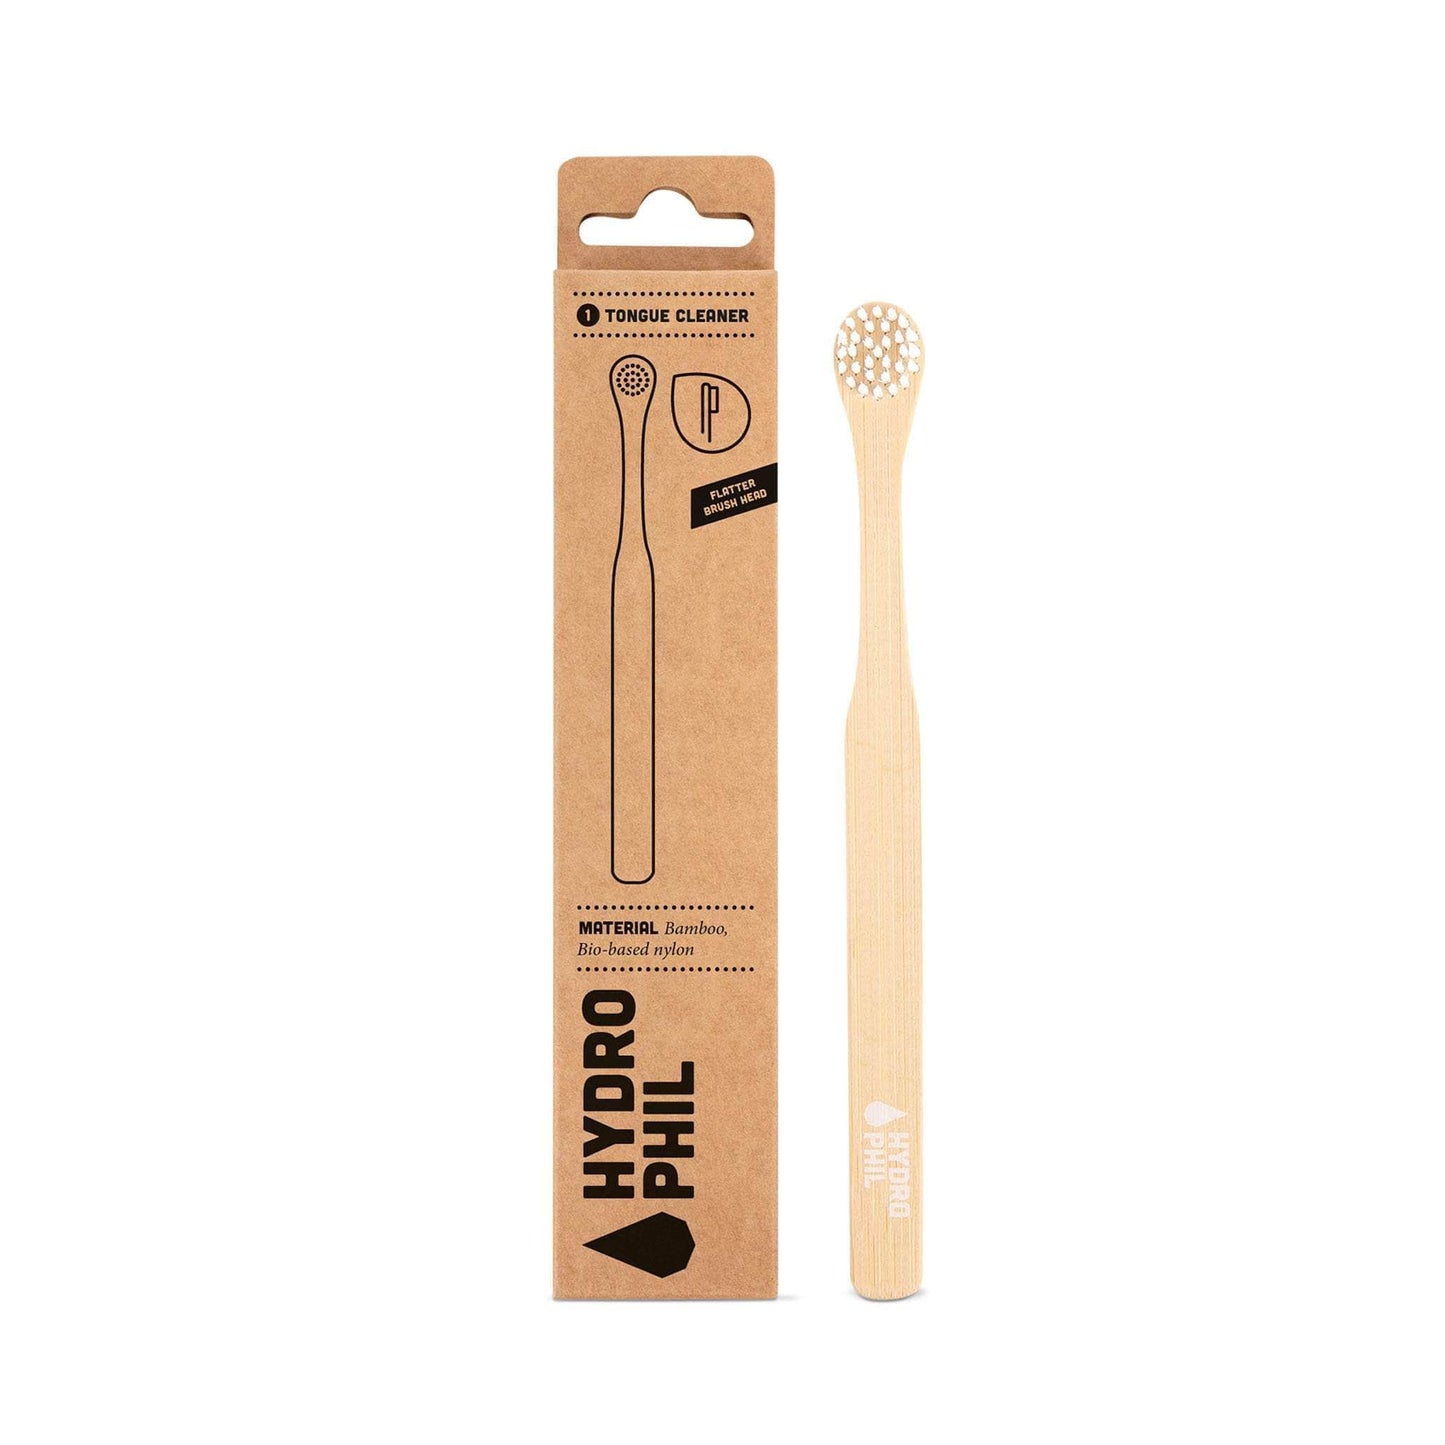 Hydrophil Toothbrushes Hydrophil - Bamboo Tongue Cleaner Brush